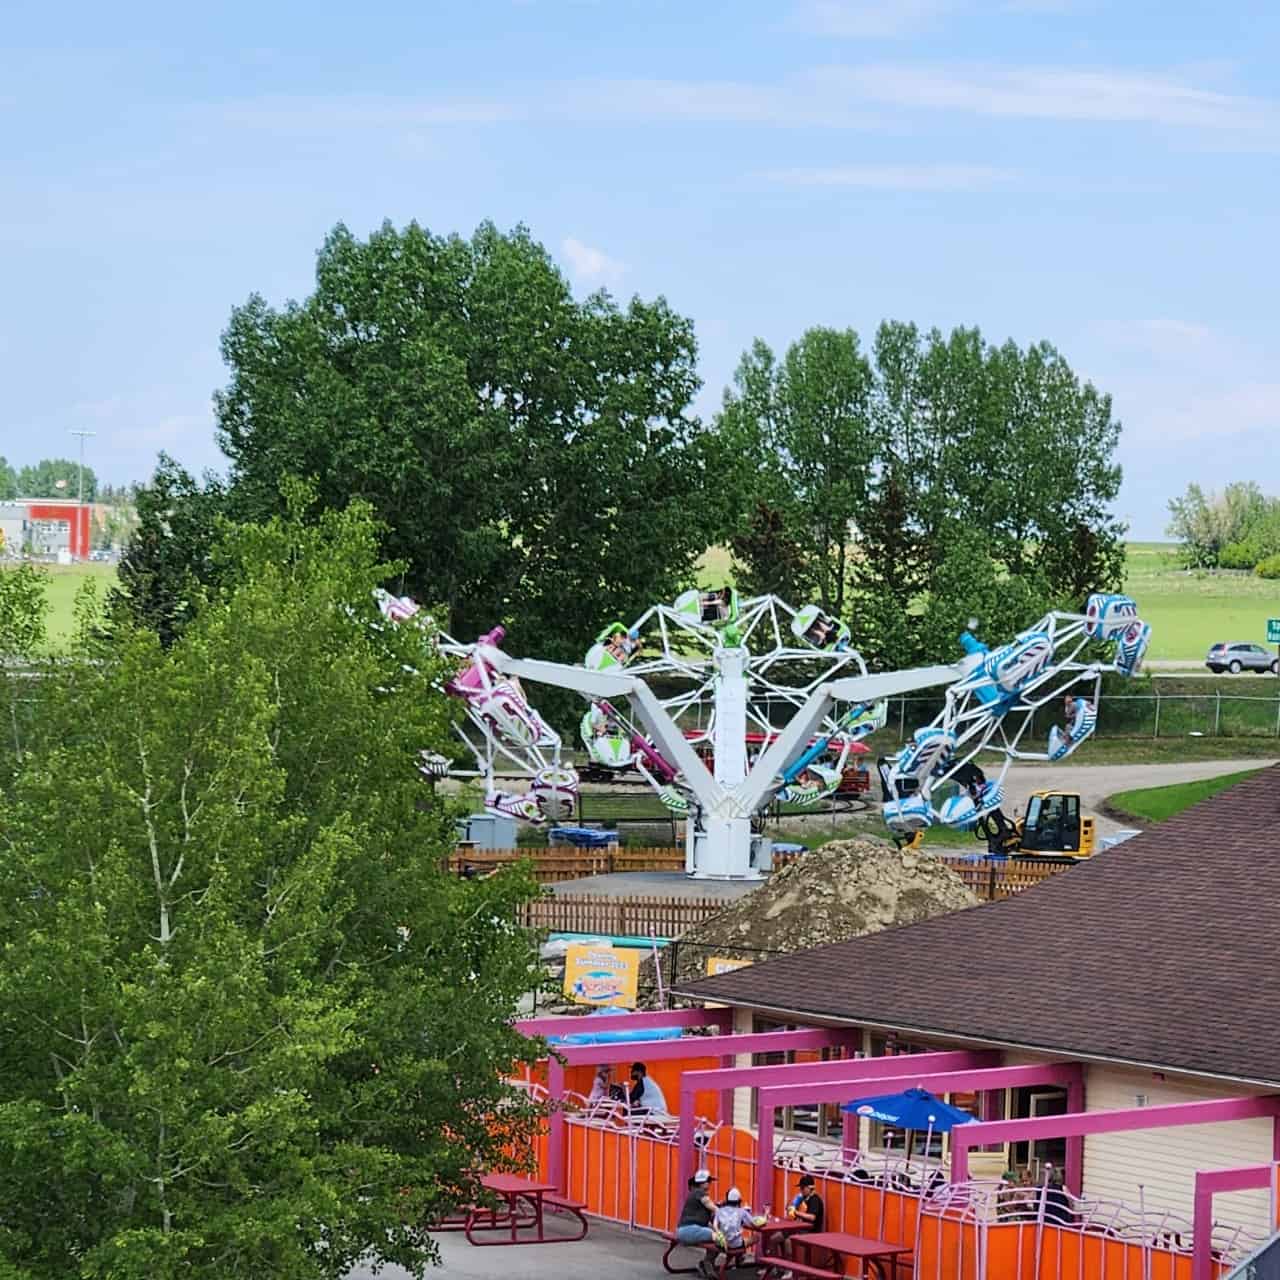 Calaway Park Big Kid Rides! - Some of the rides here are only for the taller kids, not forgetting that adults can be big kids too! 